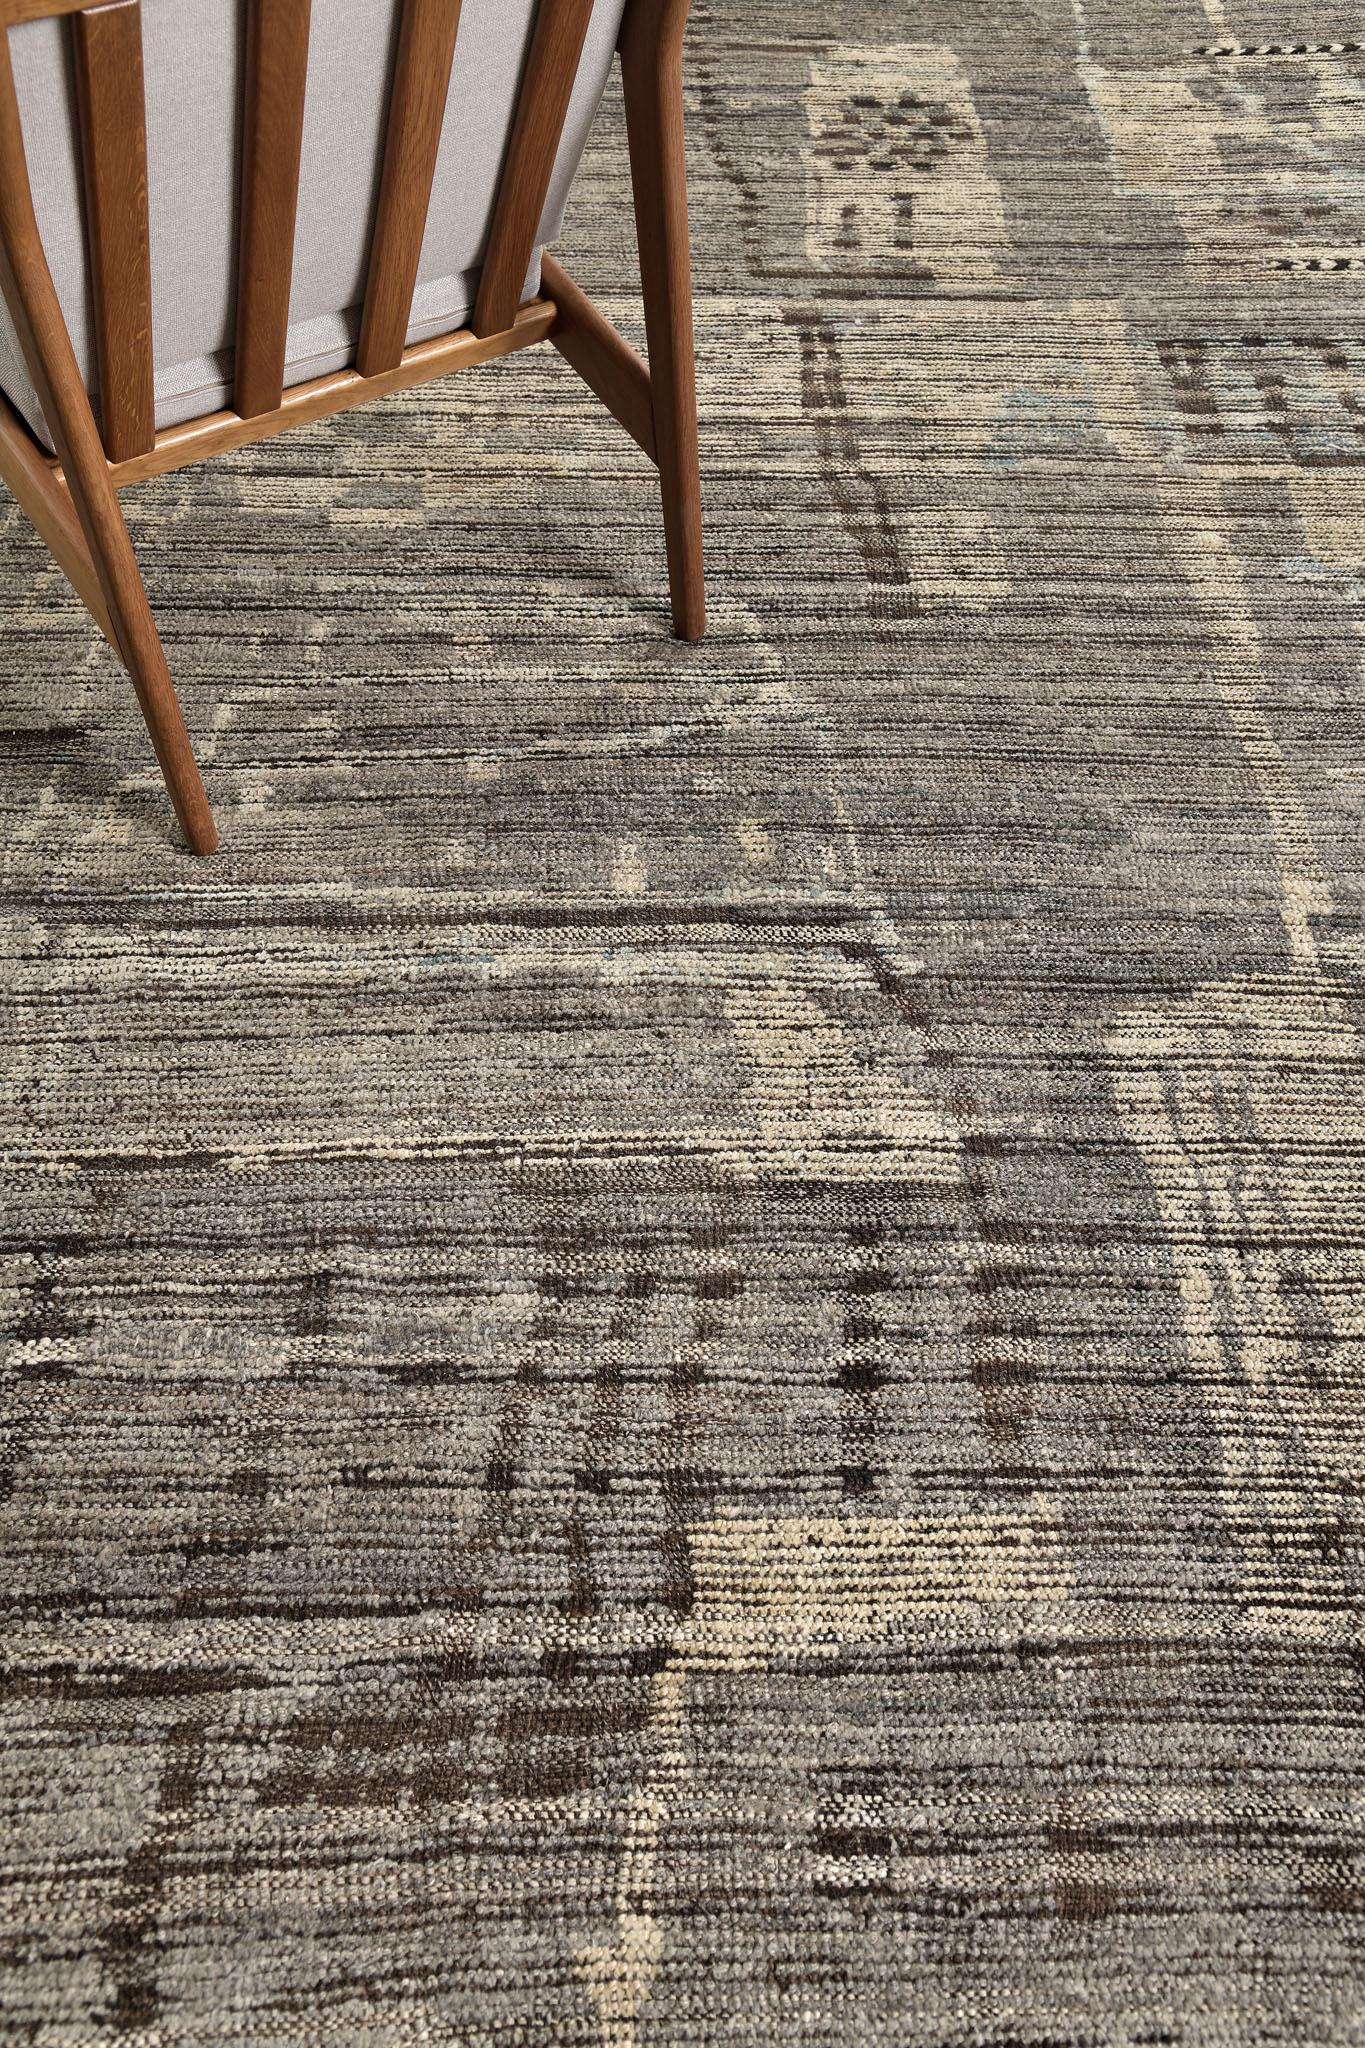 Meliska is a captivating textured rug with irregular motifs inspired by the Atlas Mountains of Morocco. Earthy tones of ivory, taupe, and chocolate brown surrounded by umber brown shag work cohesively to make for a great contemporary interpretation